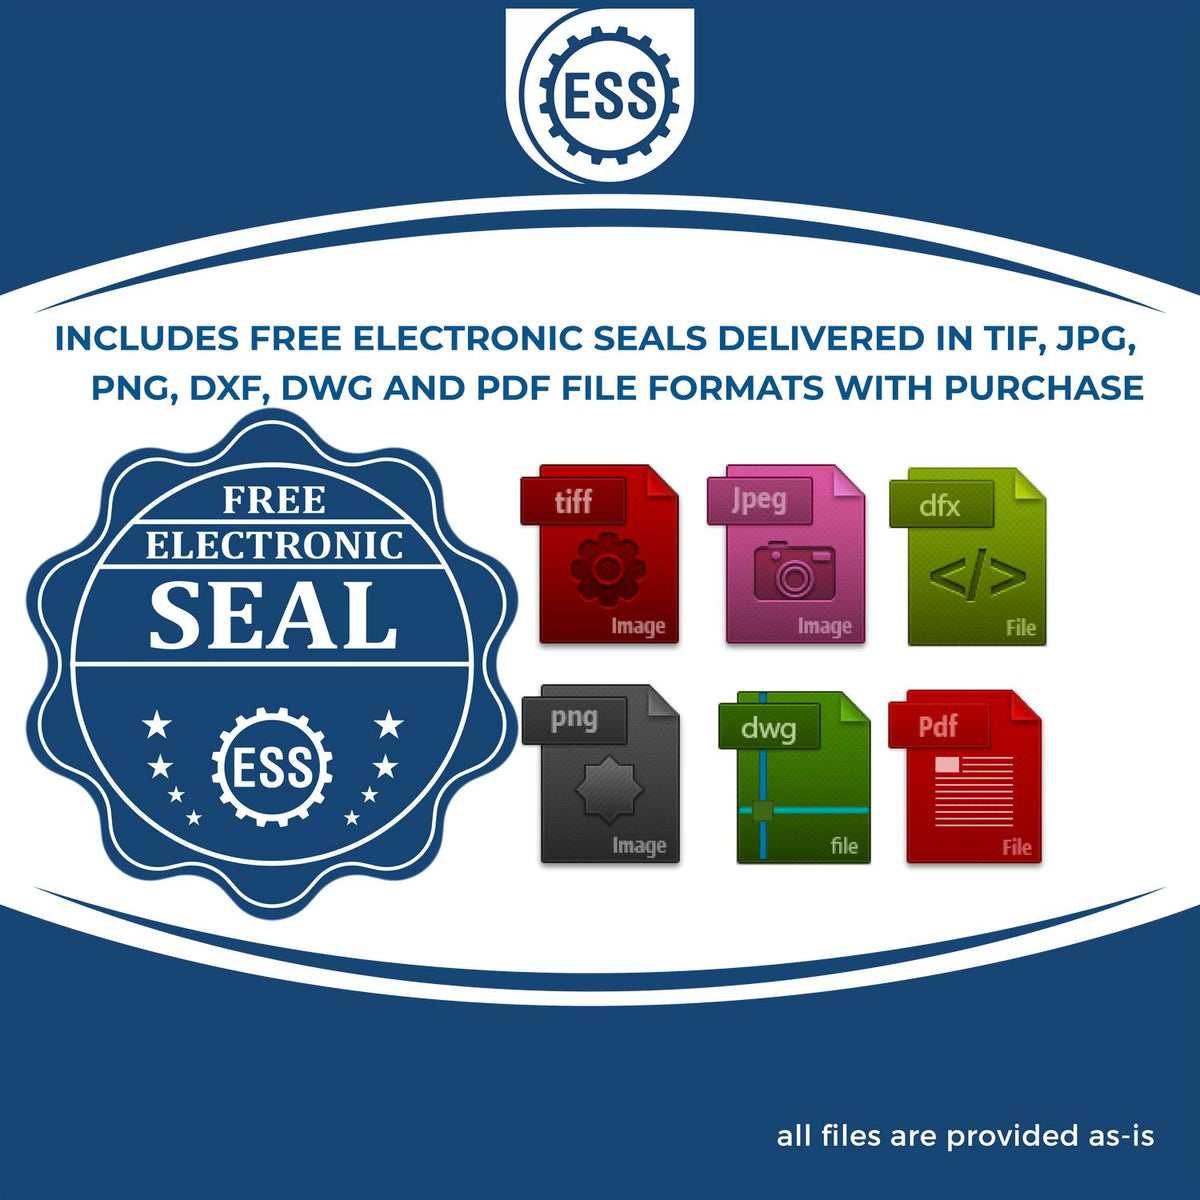 An infographic for the free electronic seal for the State of Hawaii Extended Long Reach Engineer Seal illustrating the different file type icons such as DXF, DWG, TIF, JPG and PNG.